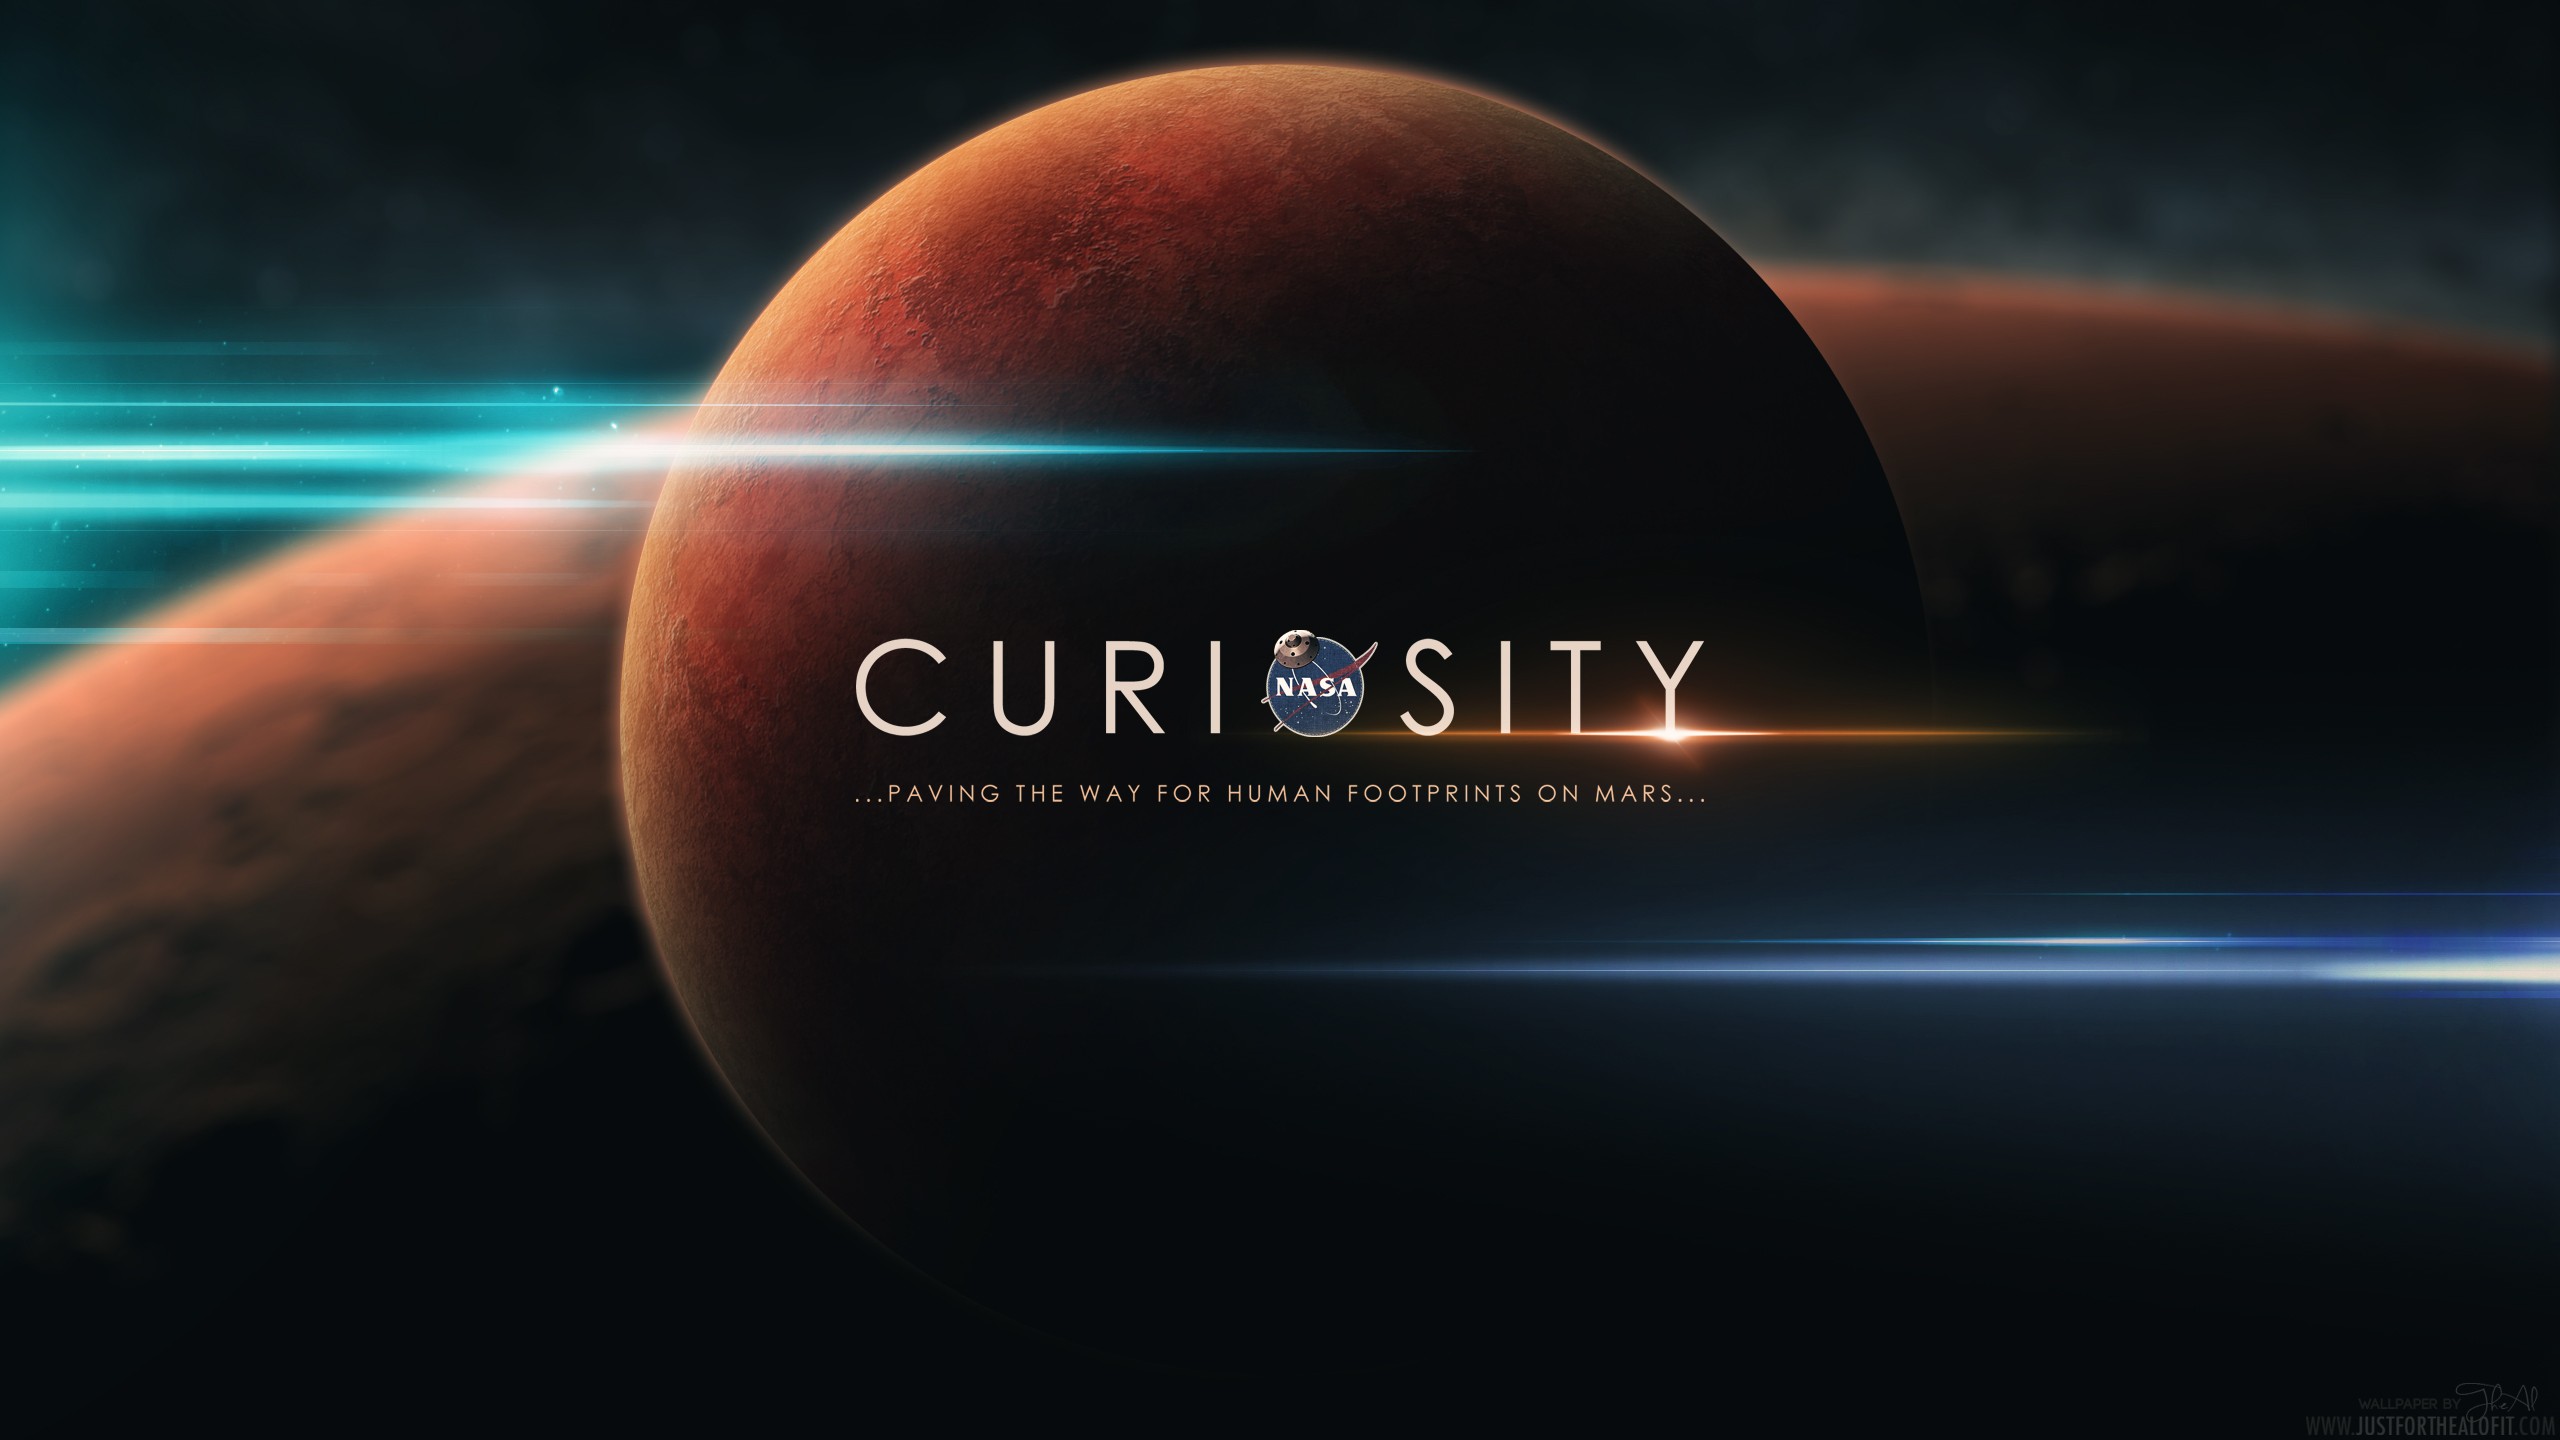 curiosity wallpaper,atmosphere,planet,outer space,astronomical object,universe